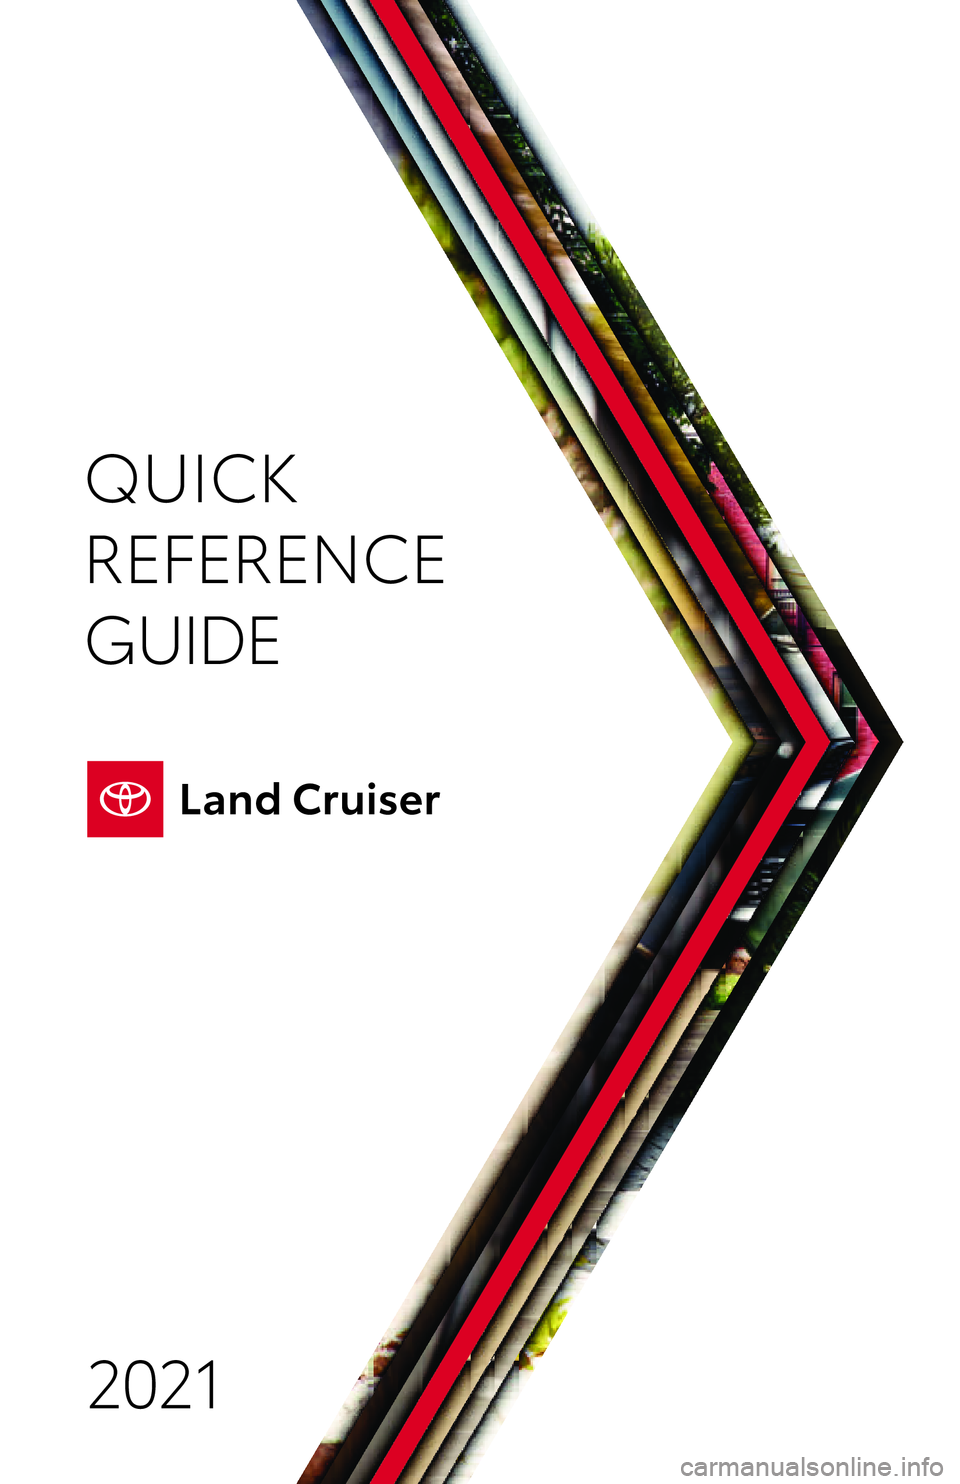 TOYOTA LAND CRUISER 2021  Owners Manual (in English) QUICK
REFERENCE 
GUIDE2021
Quick Reference Guide 2021 toyot\f.com
Printed in U.S.A. 7/20 
2 0 - M KG -14 818 